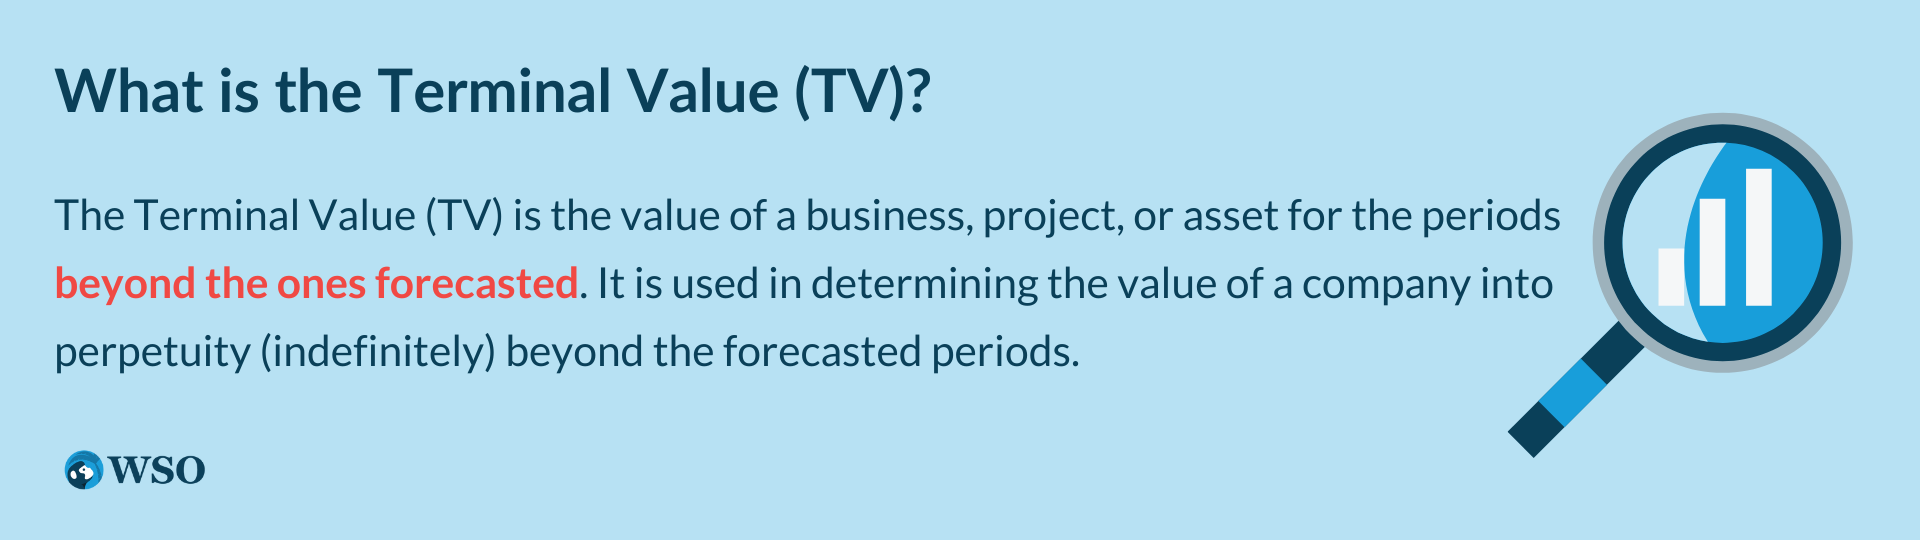 What is the Terminal Value (TV)?